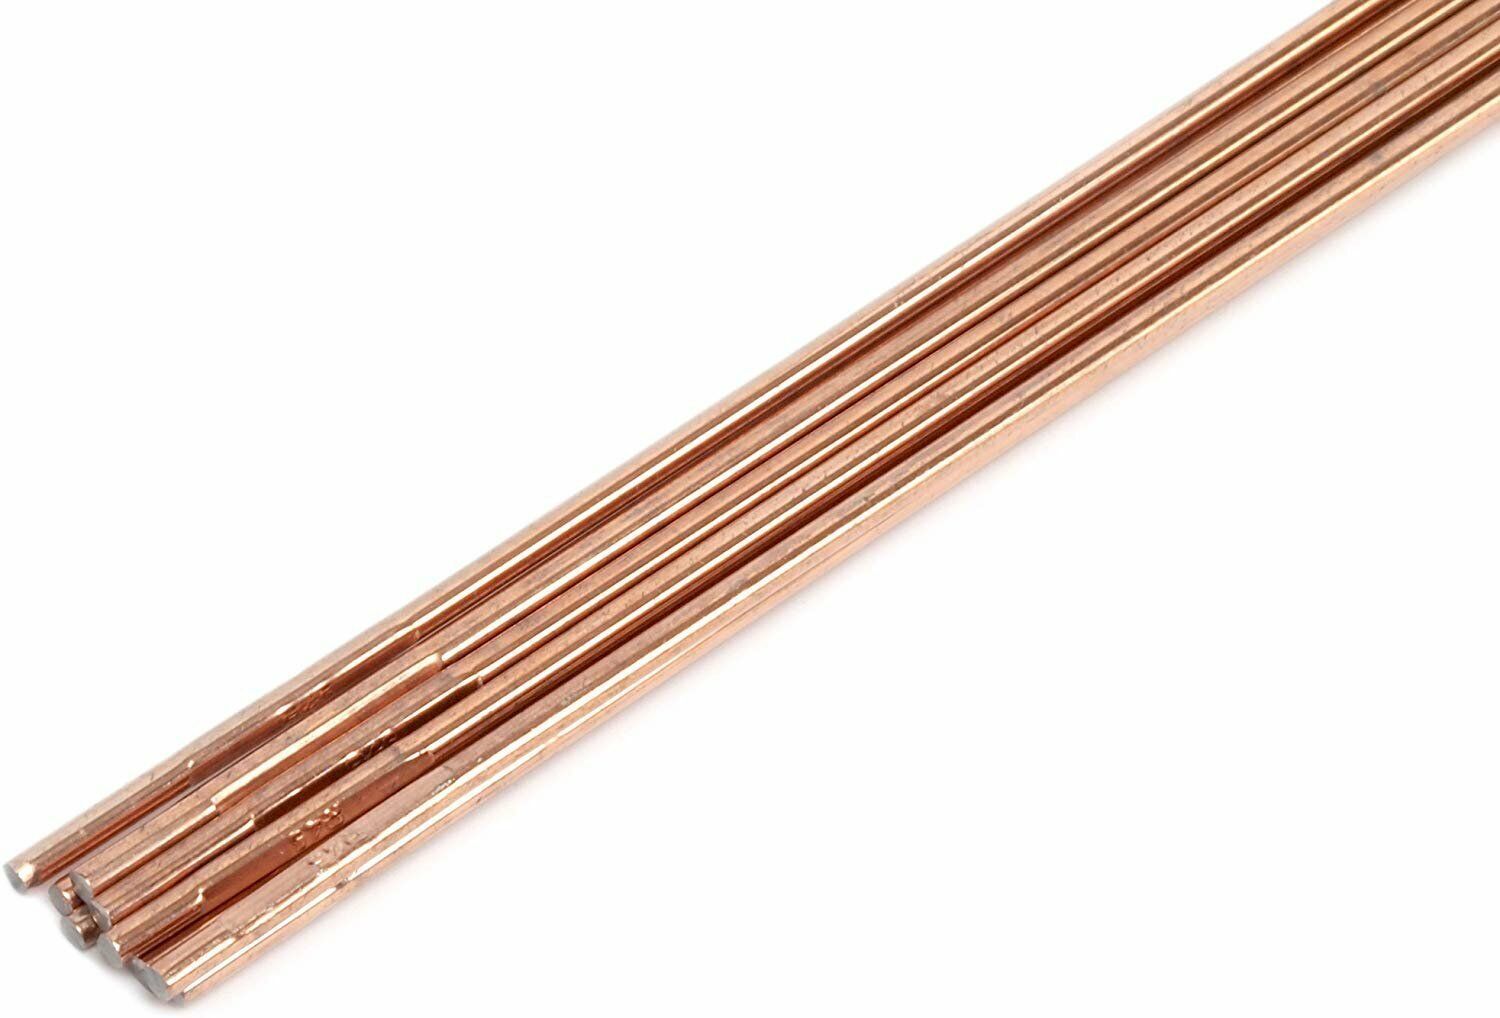 Forney 42327 Copper Coated Brazing Rod, 1/8-Inch-by-18-Inch, 10-Rods - $35.99